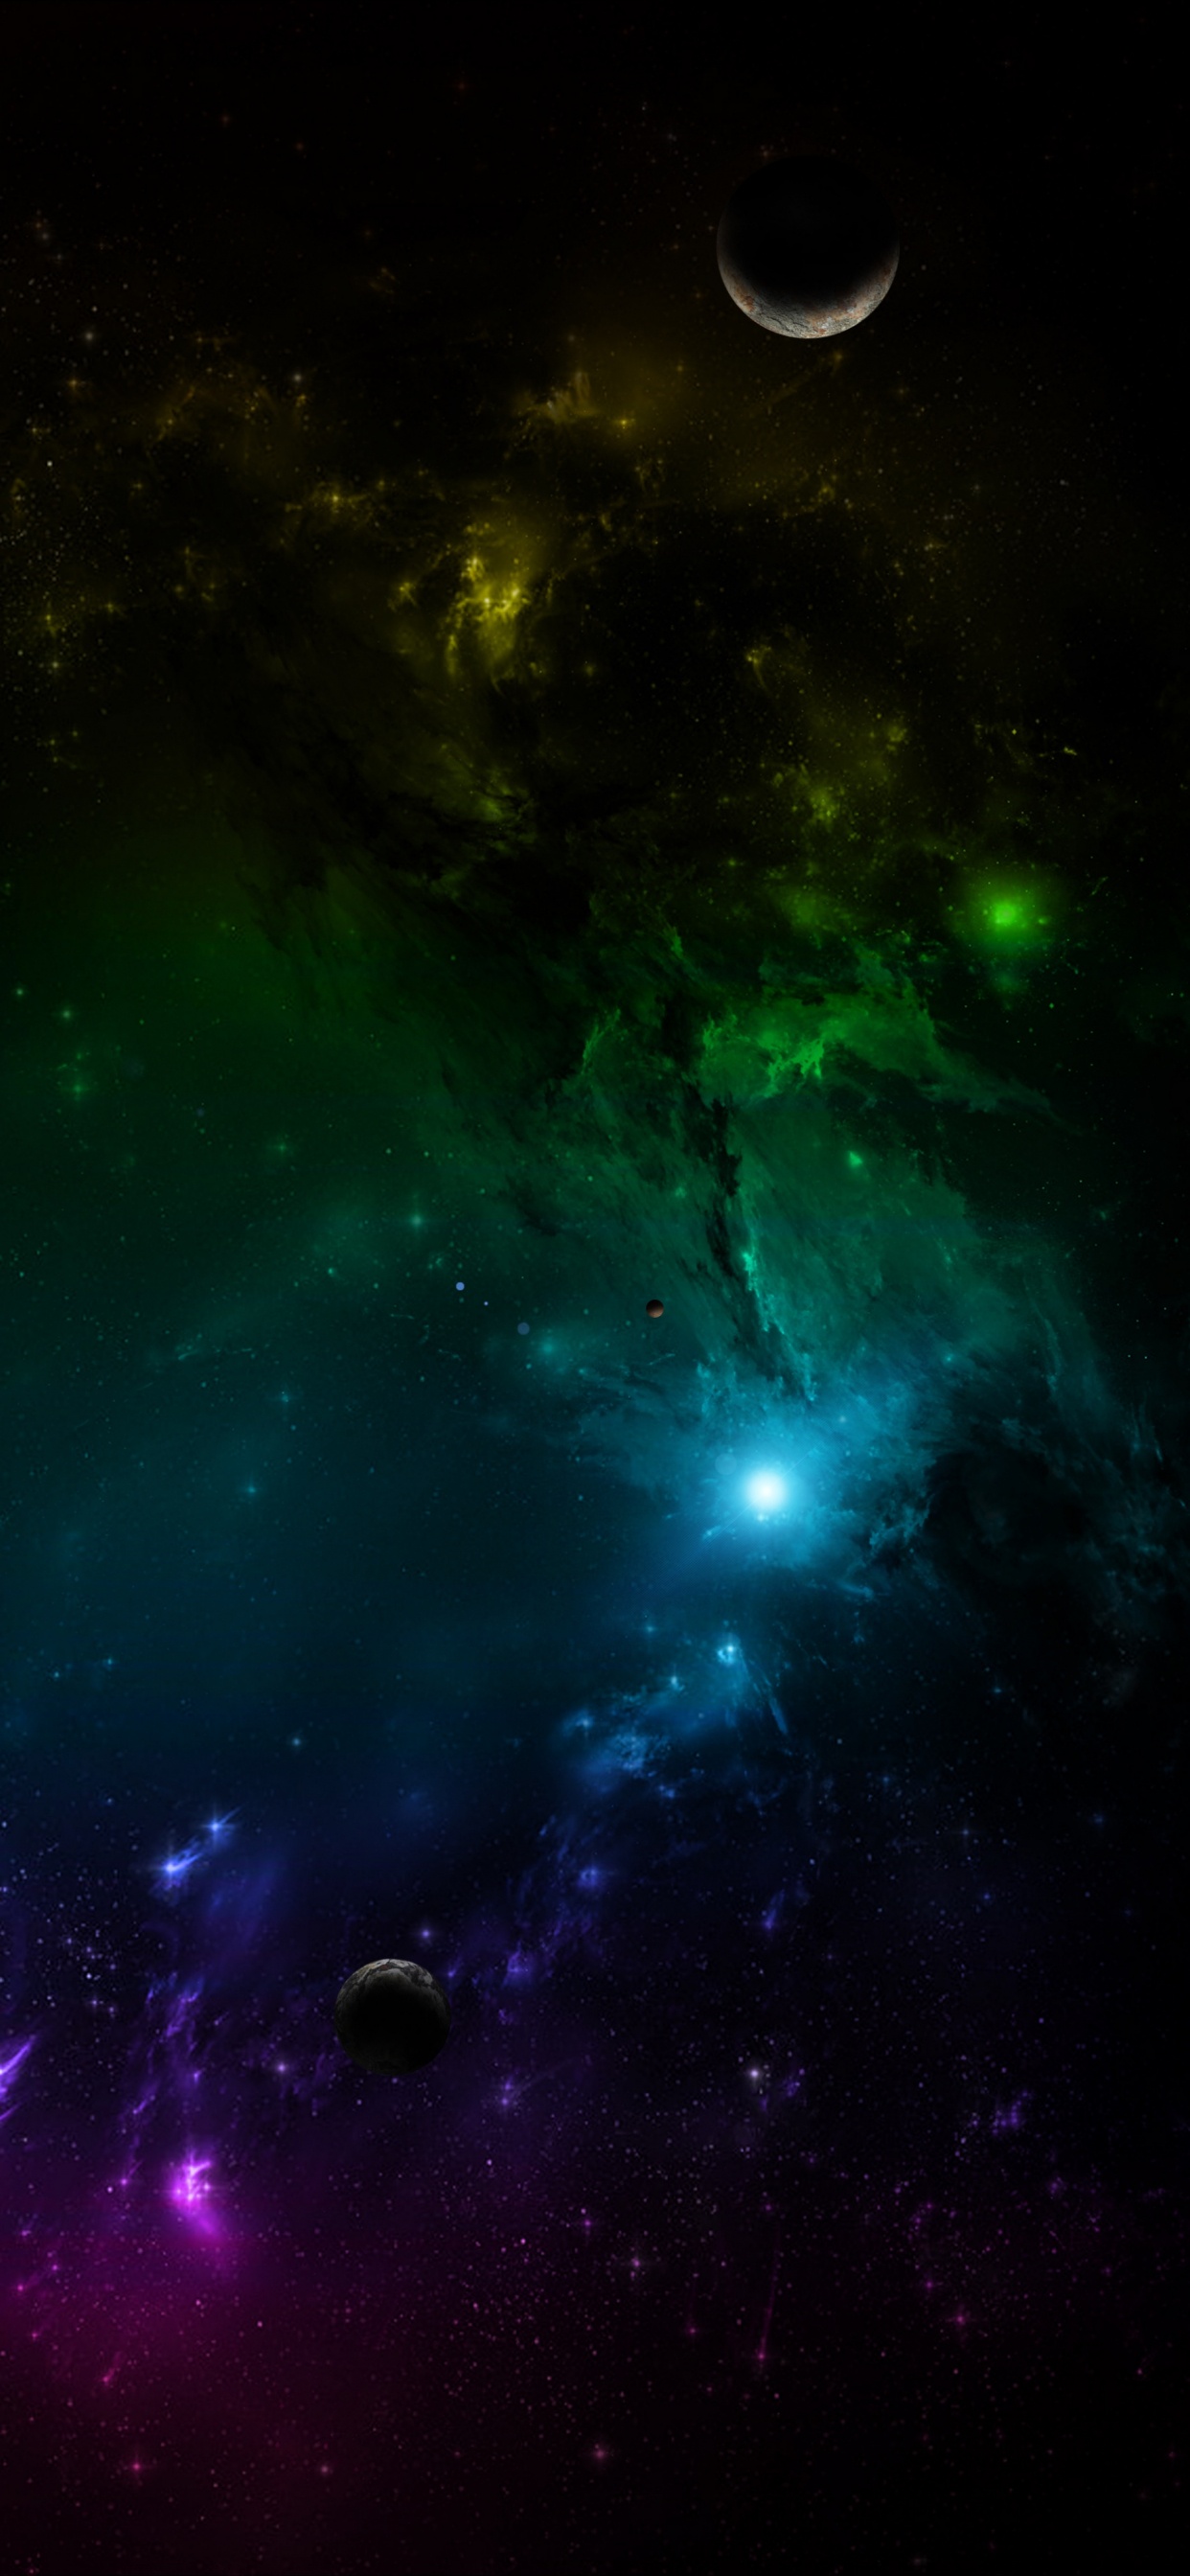 Green and Blue Galaxy Illustration. Wallpaper in 1242x2688 Resolution